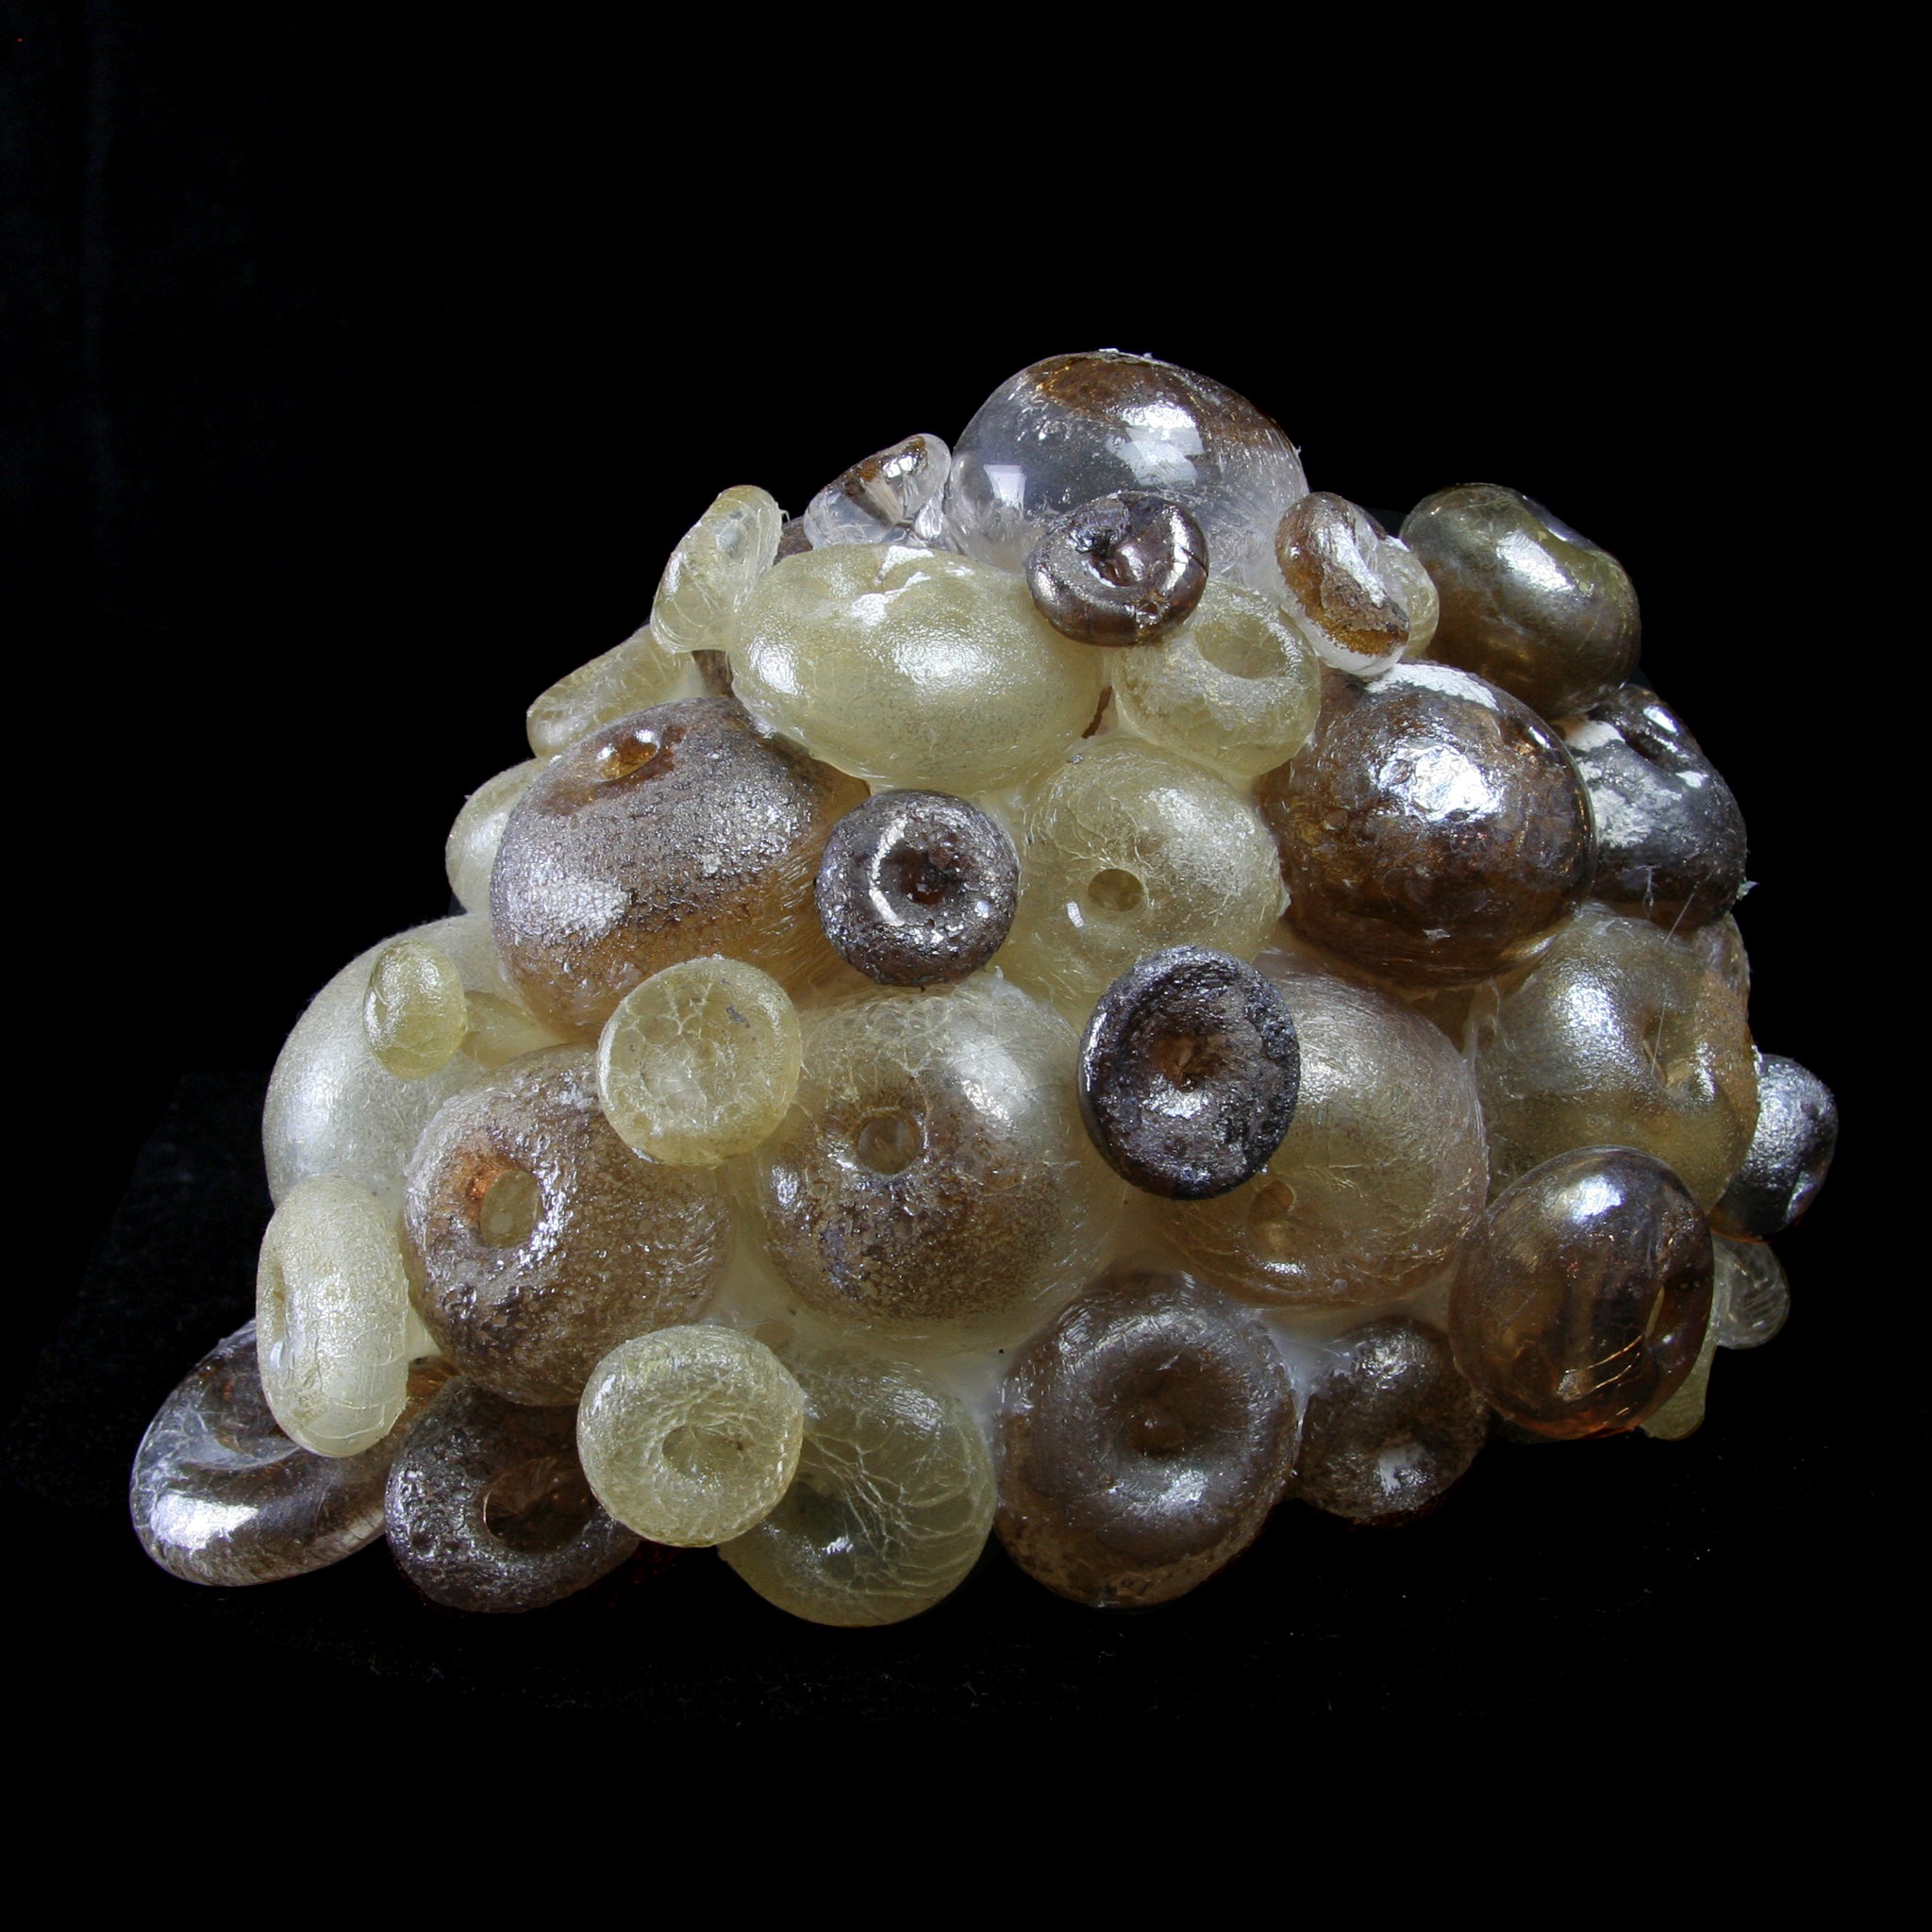 Alternate side view of Large Brown Barnacle glass sculpture